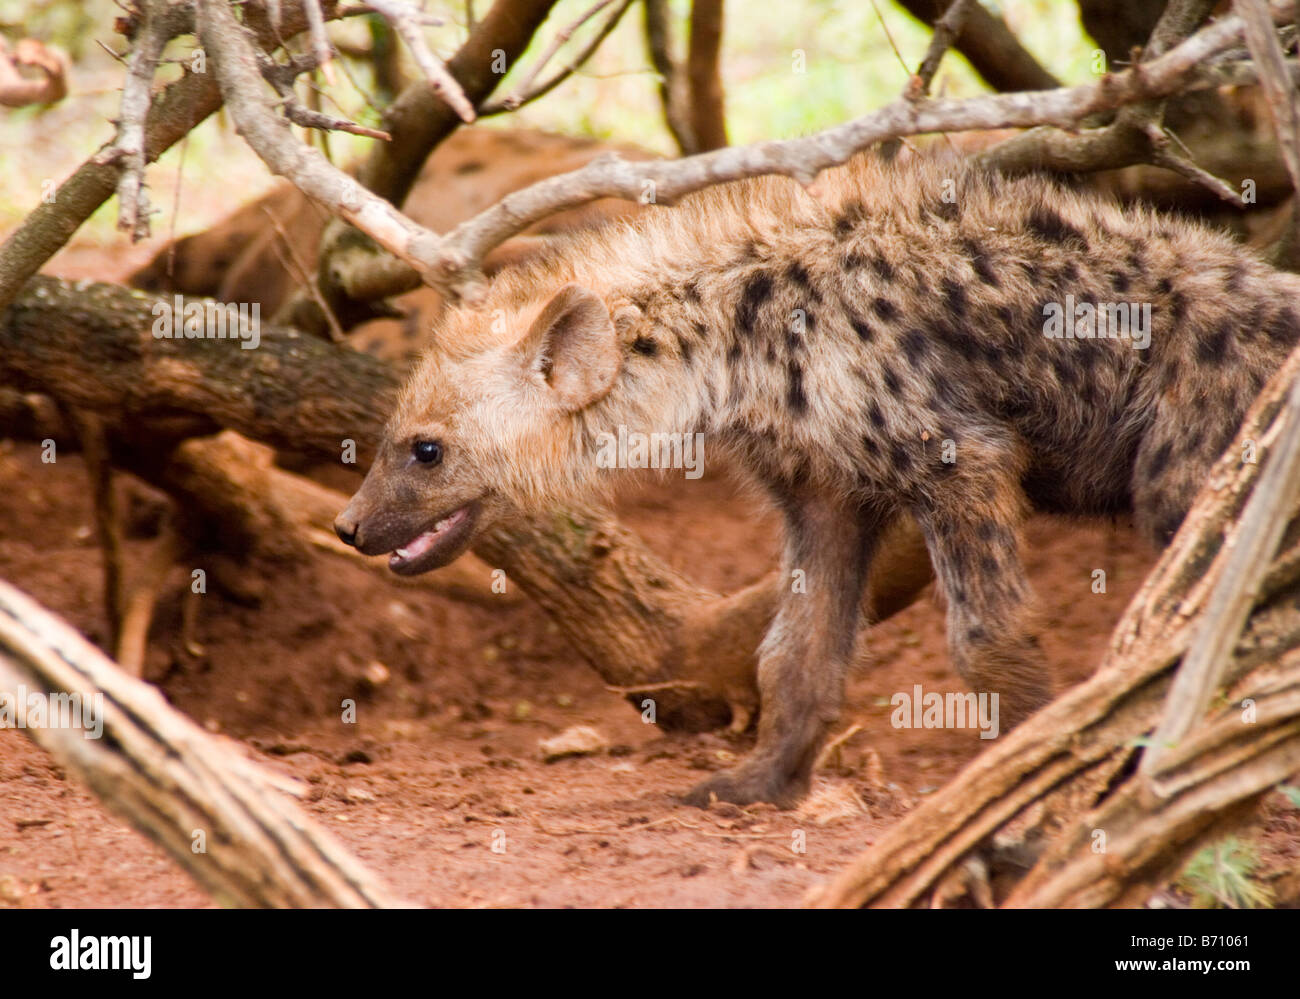 A baby hyena in South Africa's Hluhluwe Imfolozi parks in KwaZulu-Natal. Stock Photo